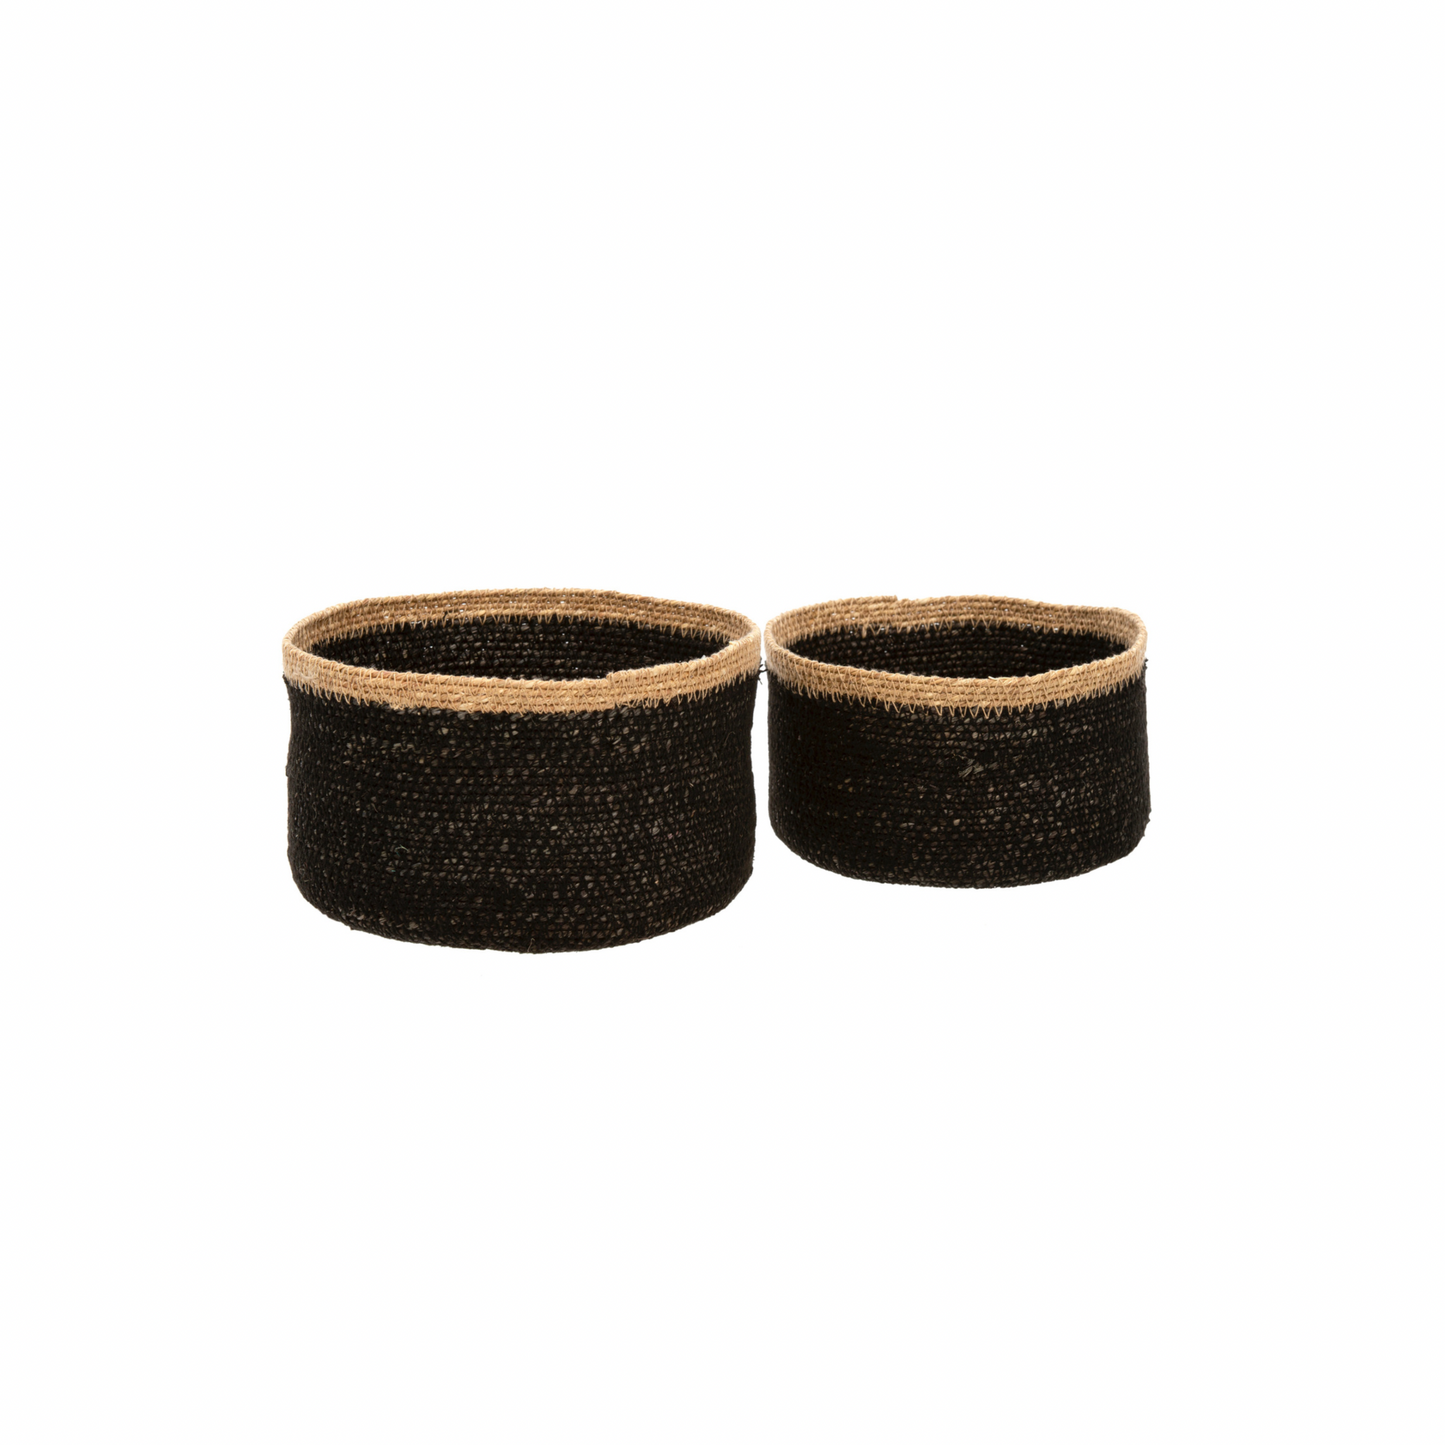 Two black seagrass baskets with tan stripe at top